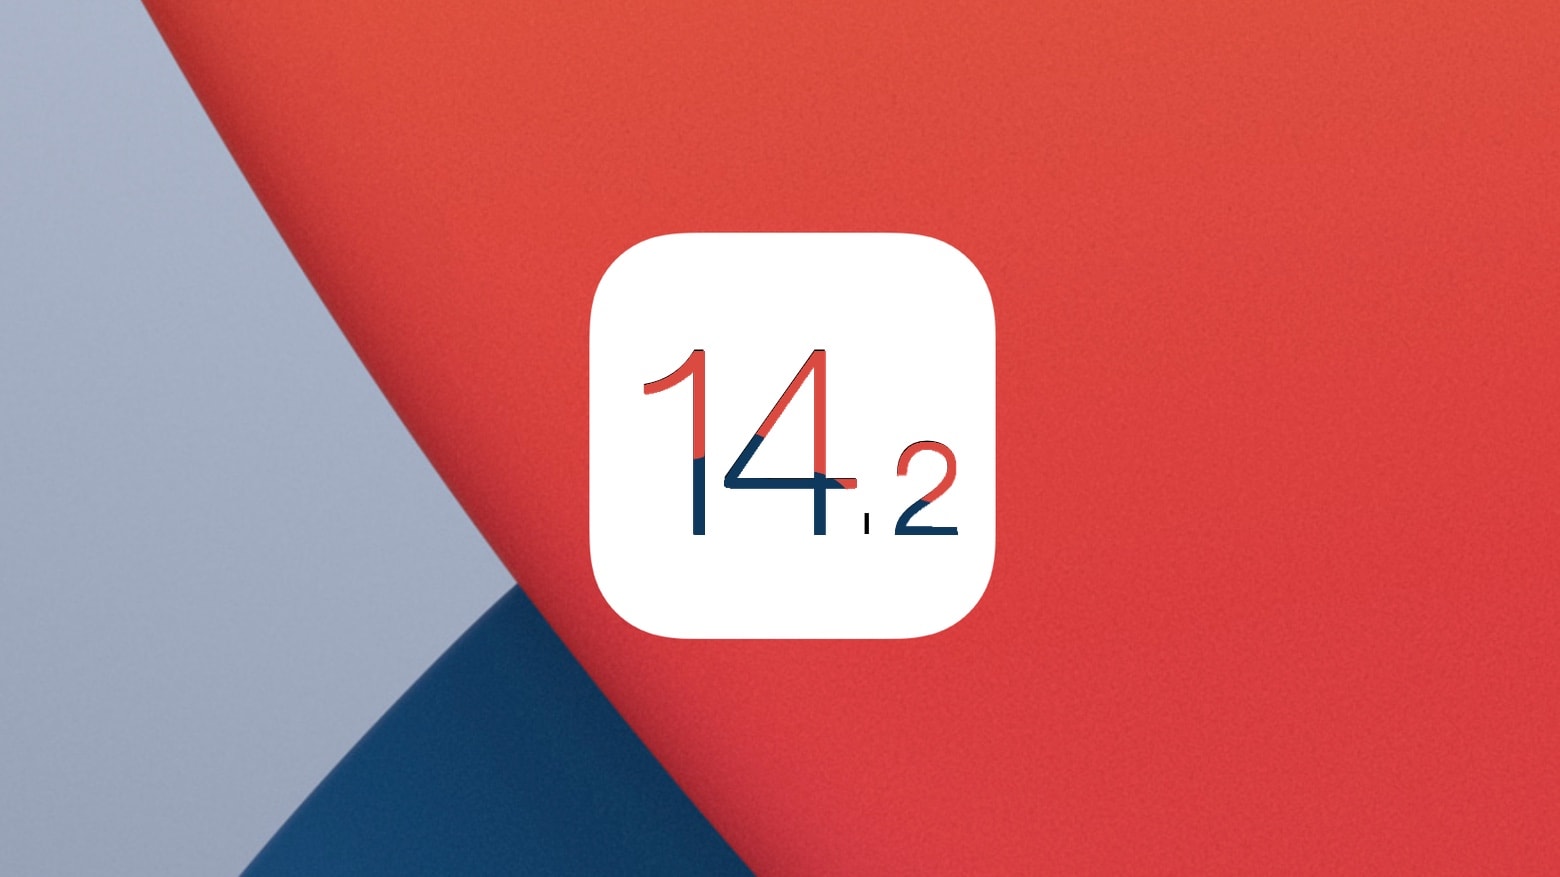 Don’t install the iOS 14.2 beta if you plan to get an iPhone 12 ASAP